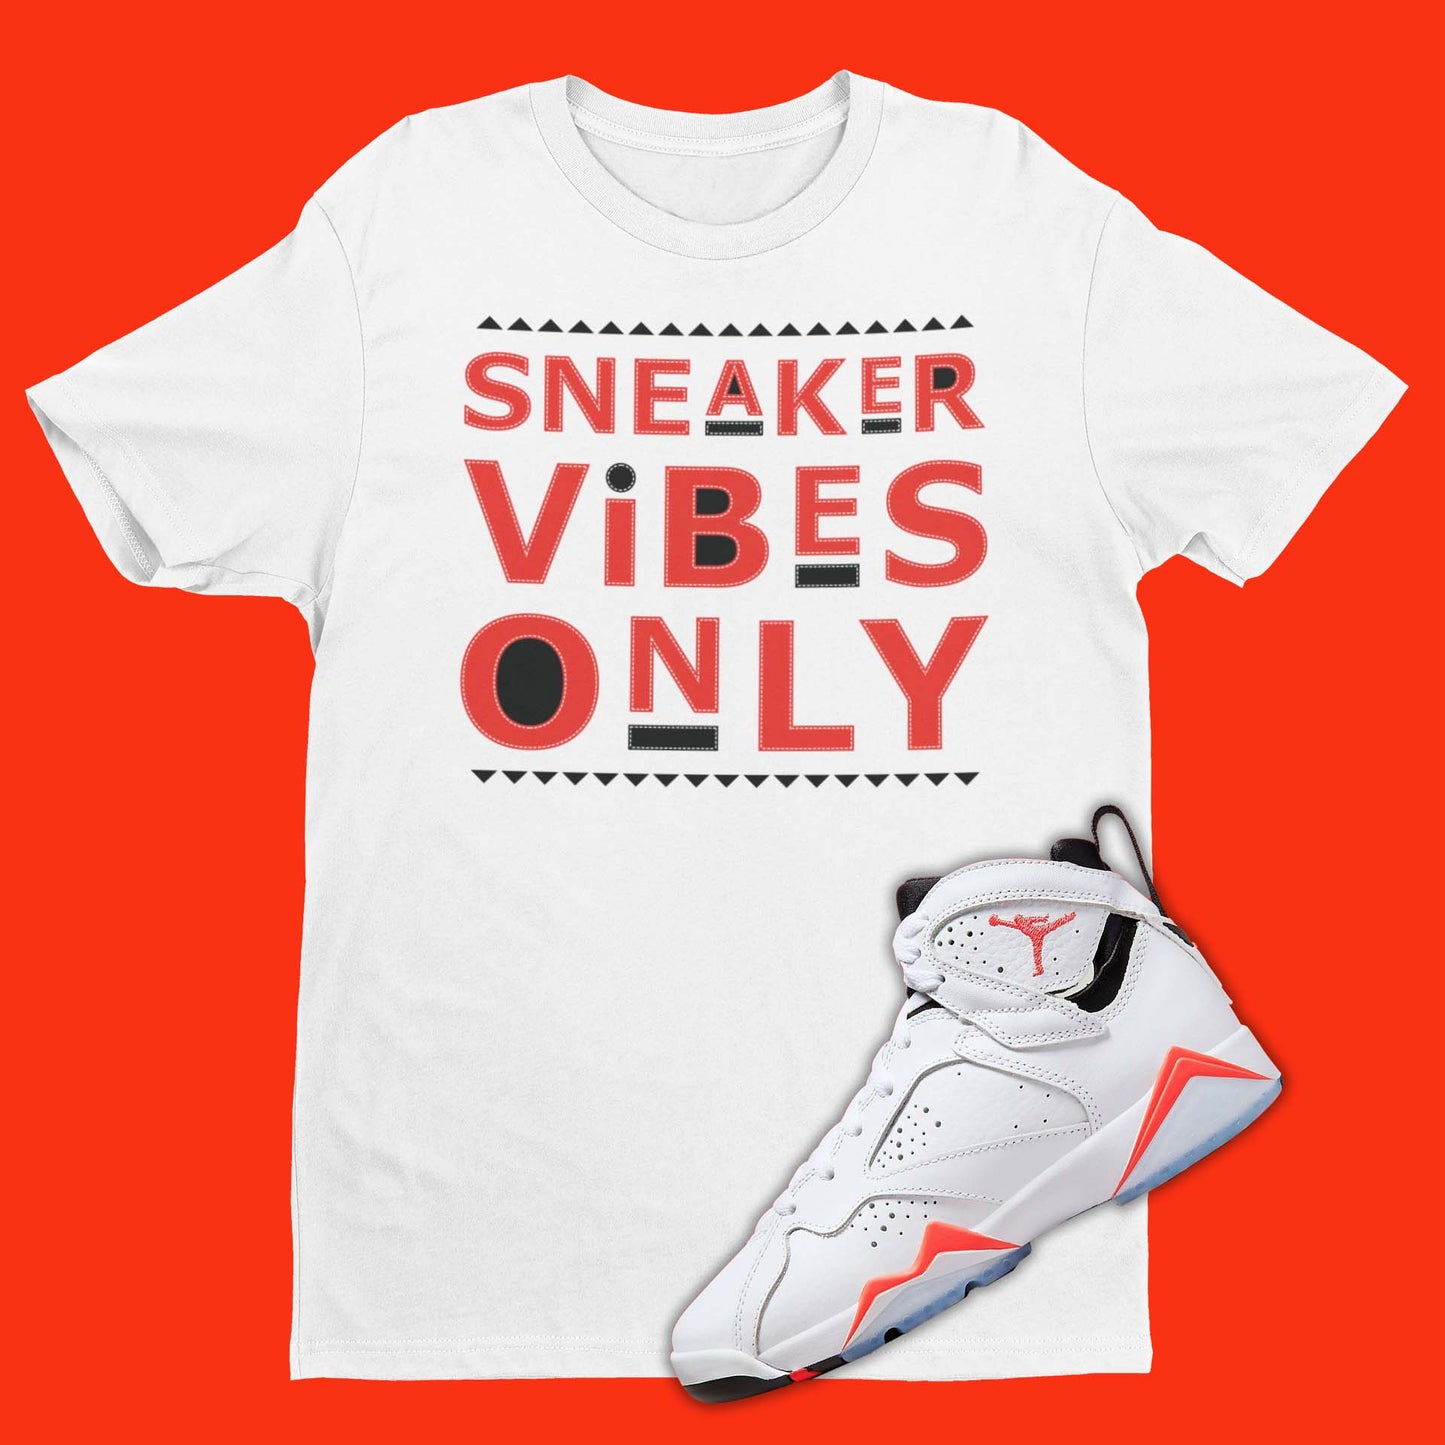 Sneaker Vibes Only Matching Air Jordan 7 White Infrared